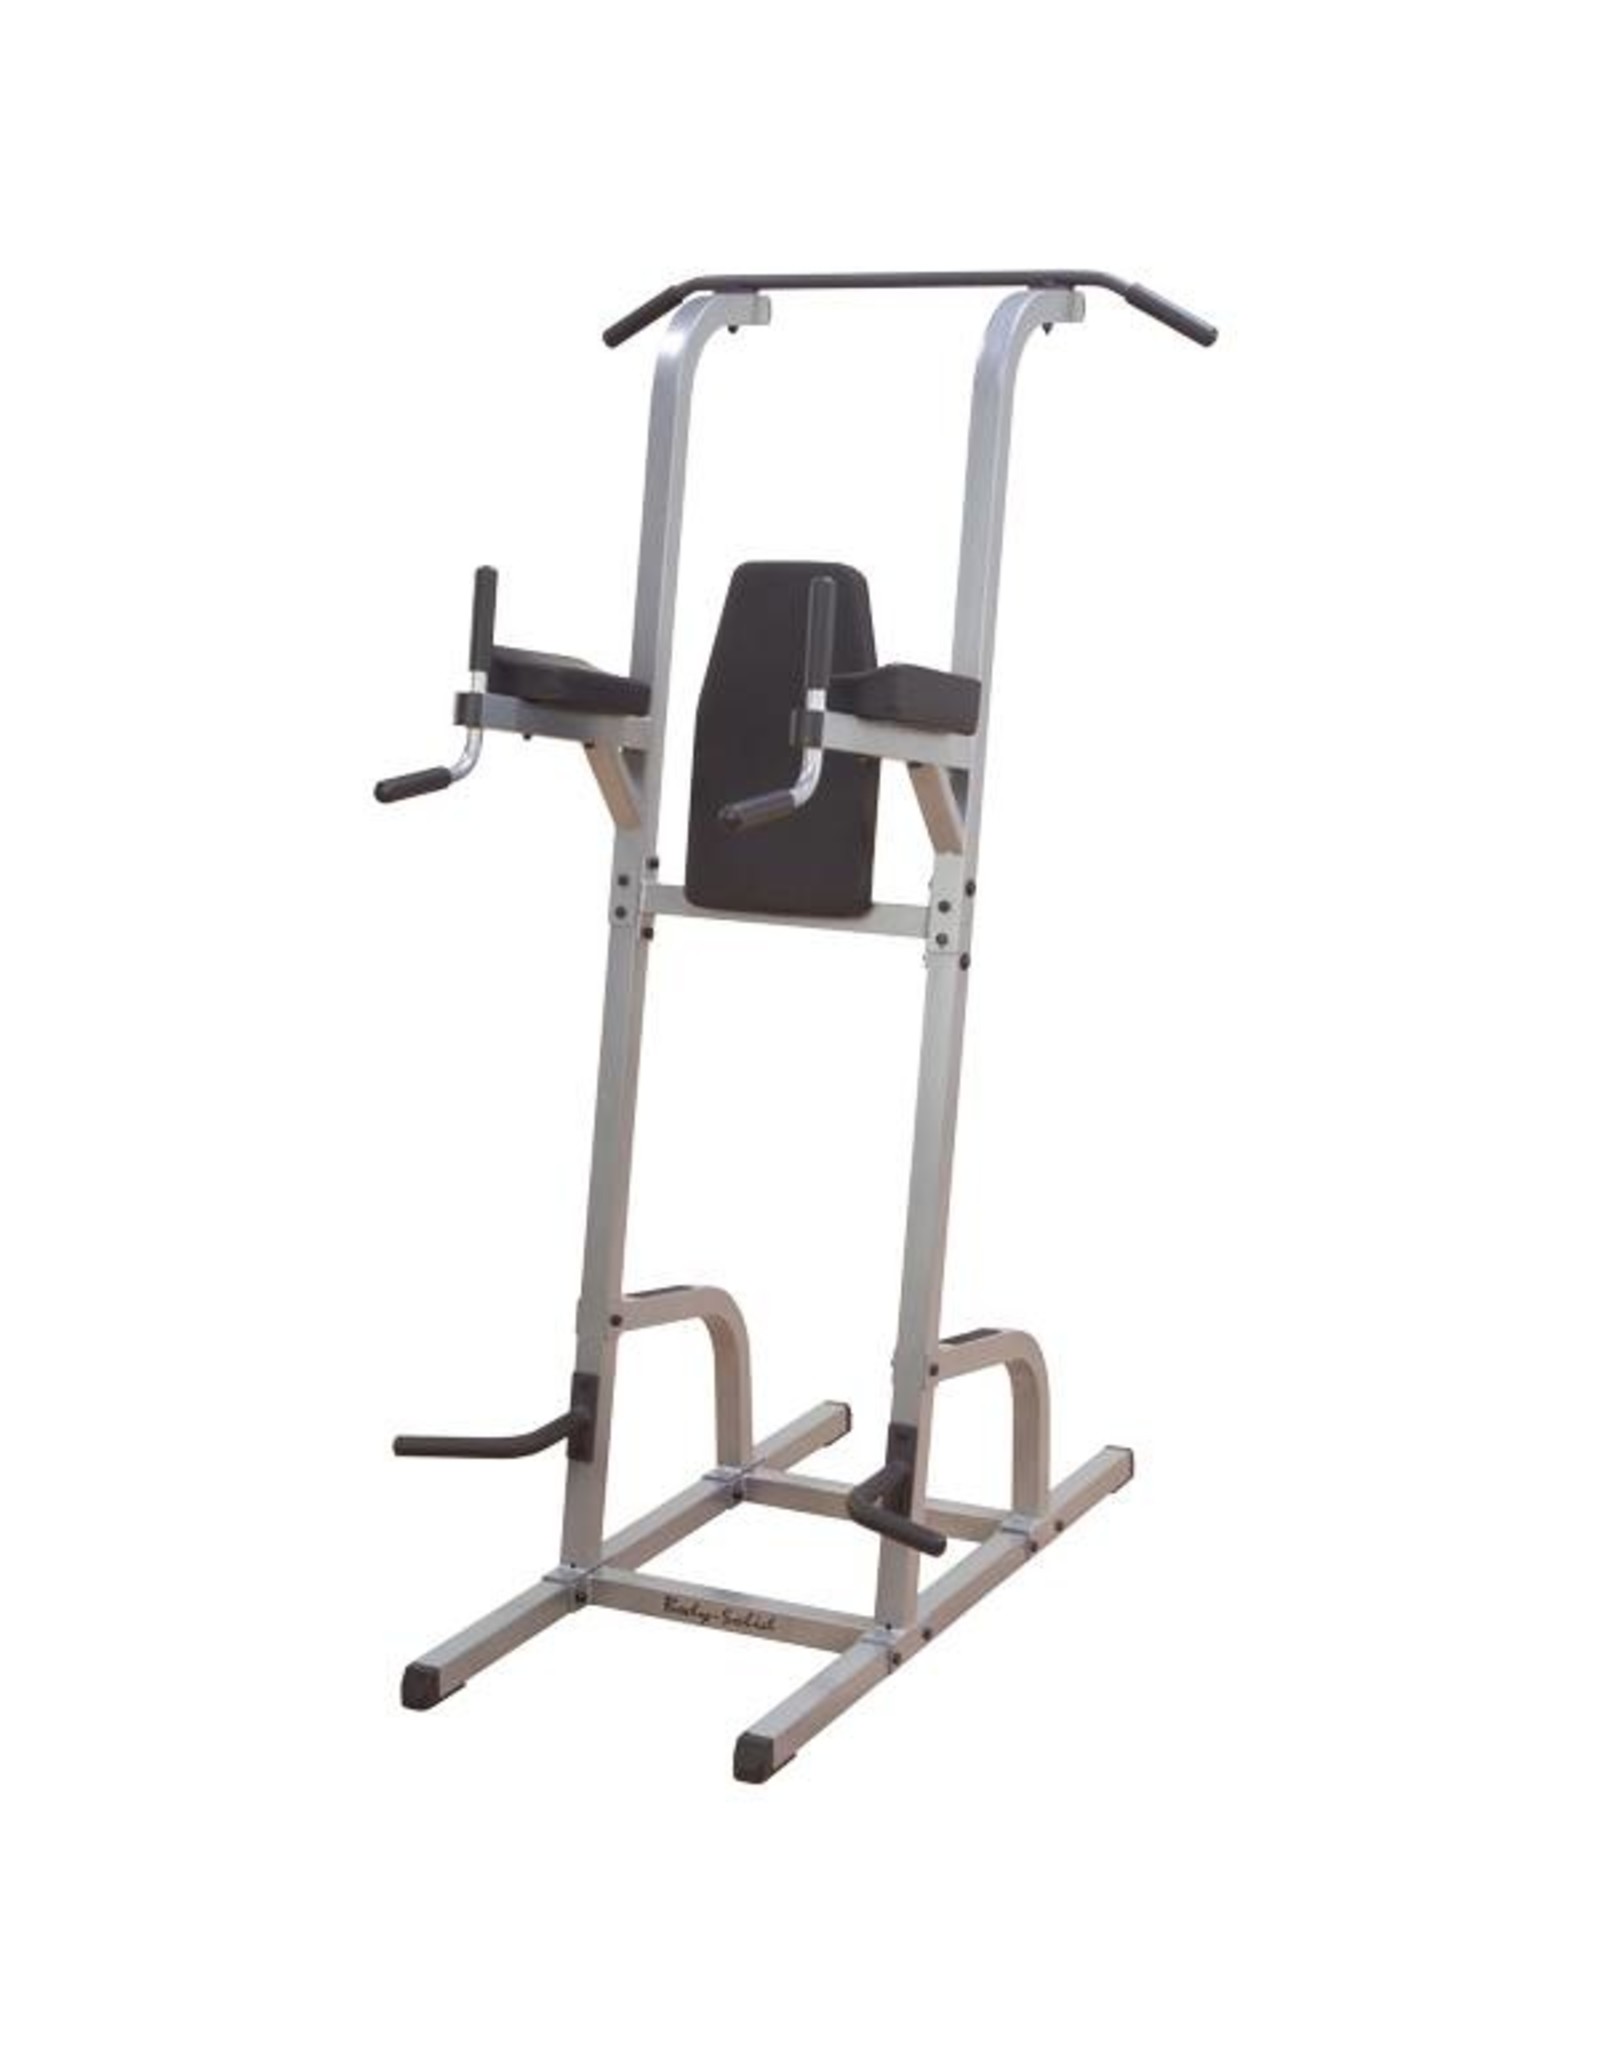 Body-Solid Body-Solid GVKR82 Vertical Knee Raise